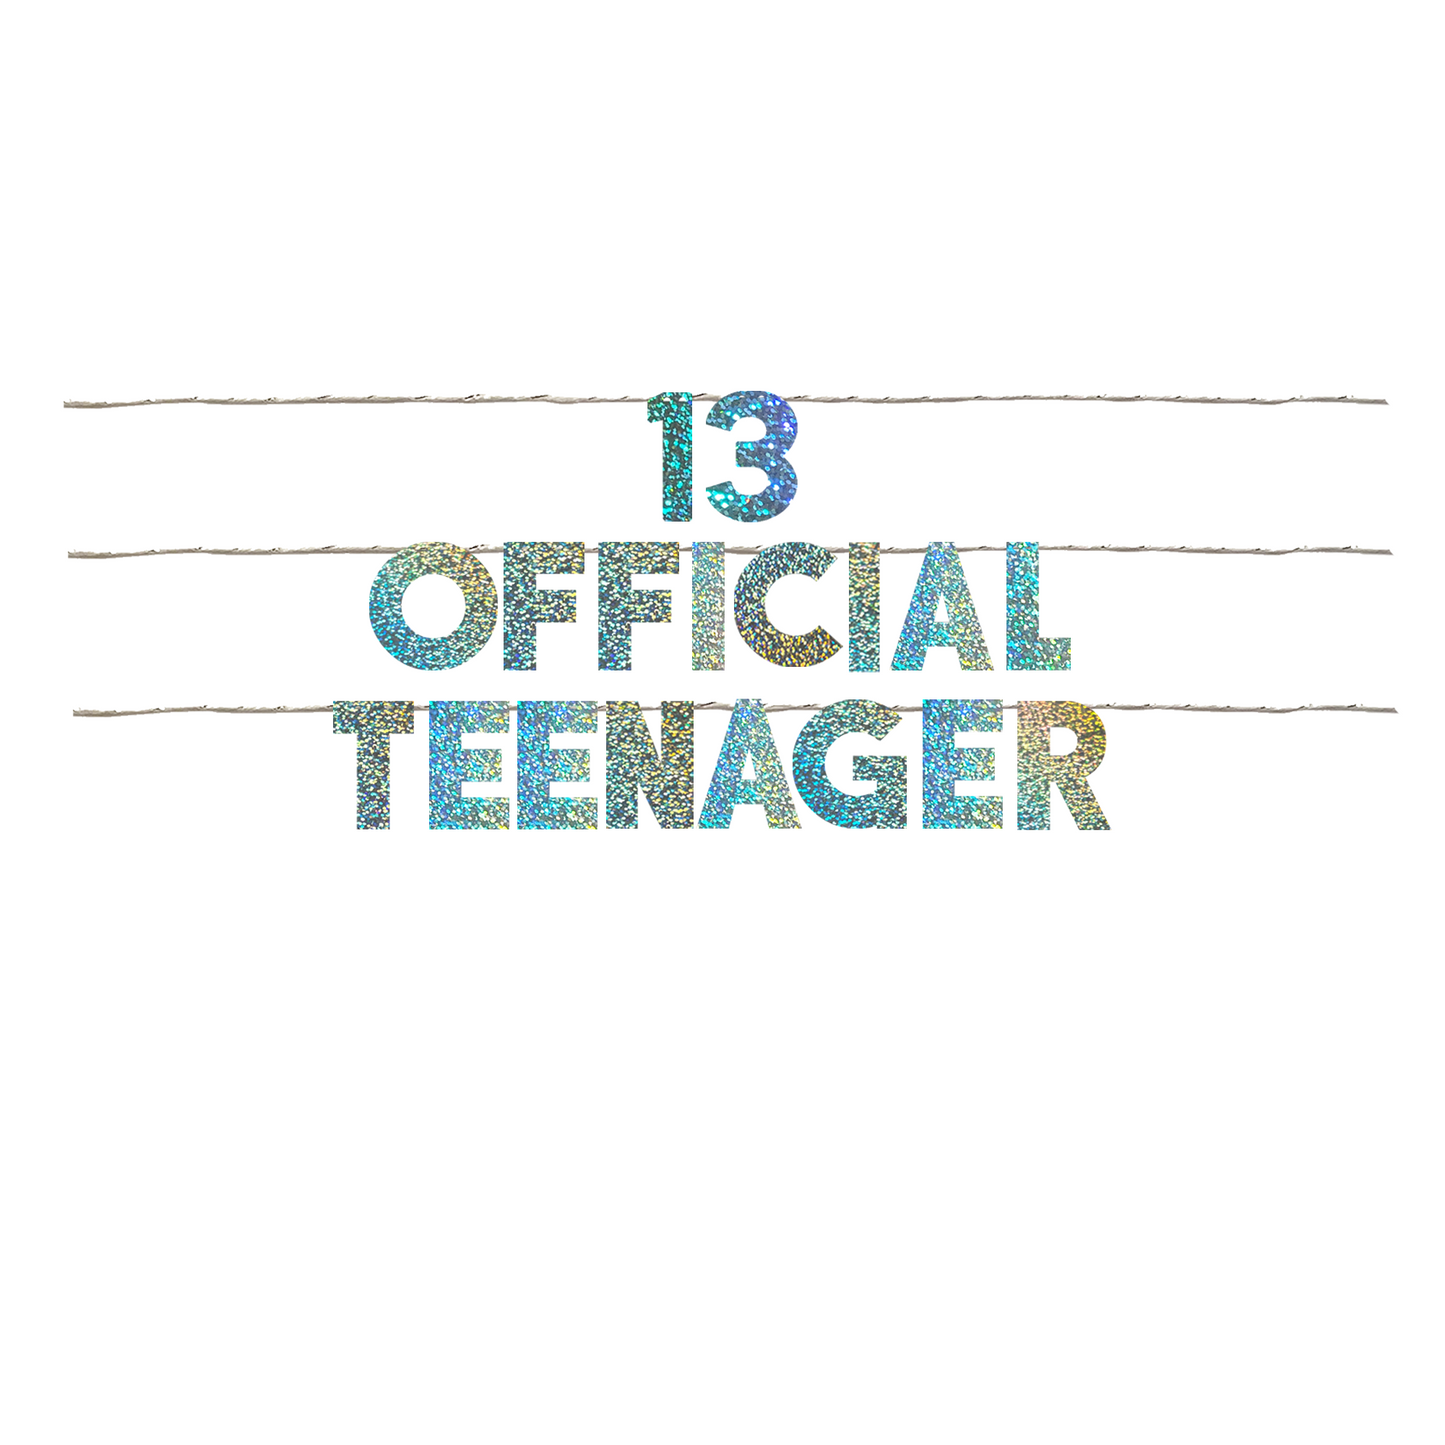 13 OFFICIAL TEENAGER